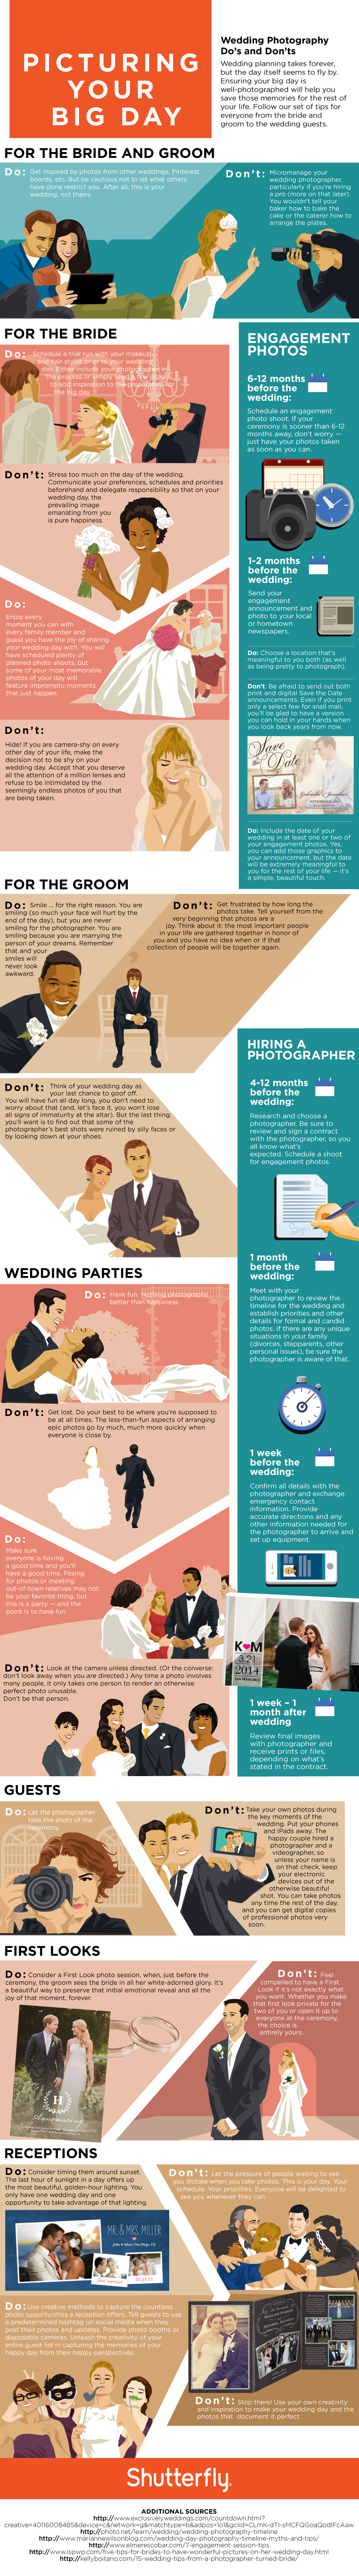 Picturing Your Big Day